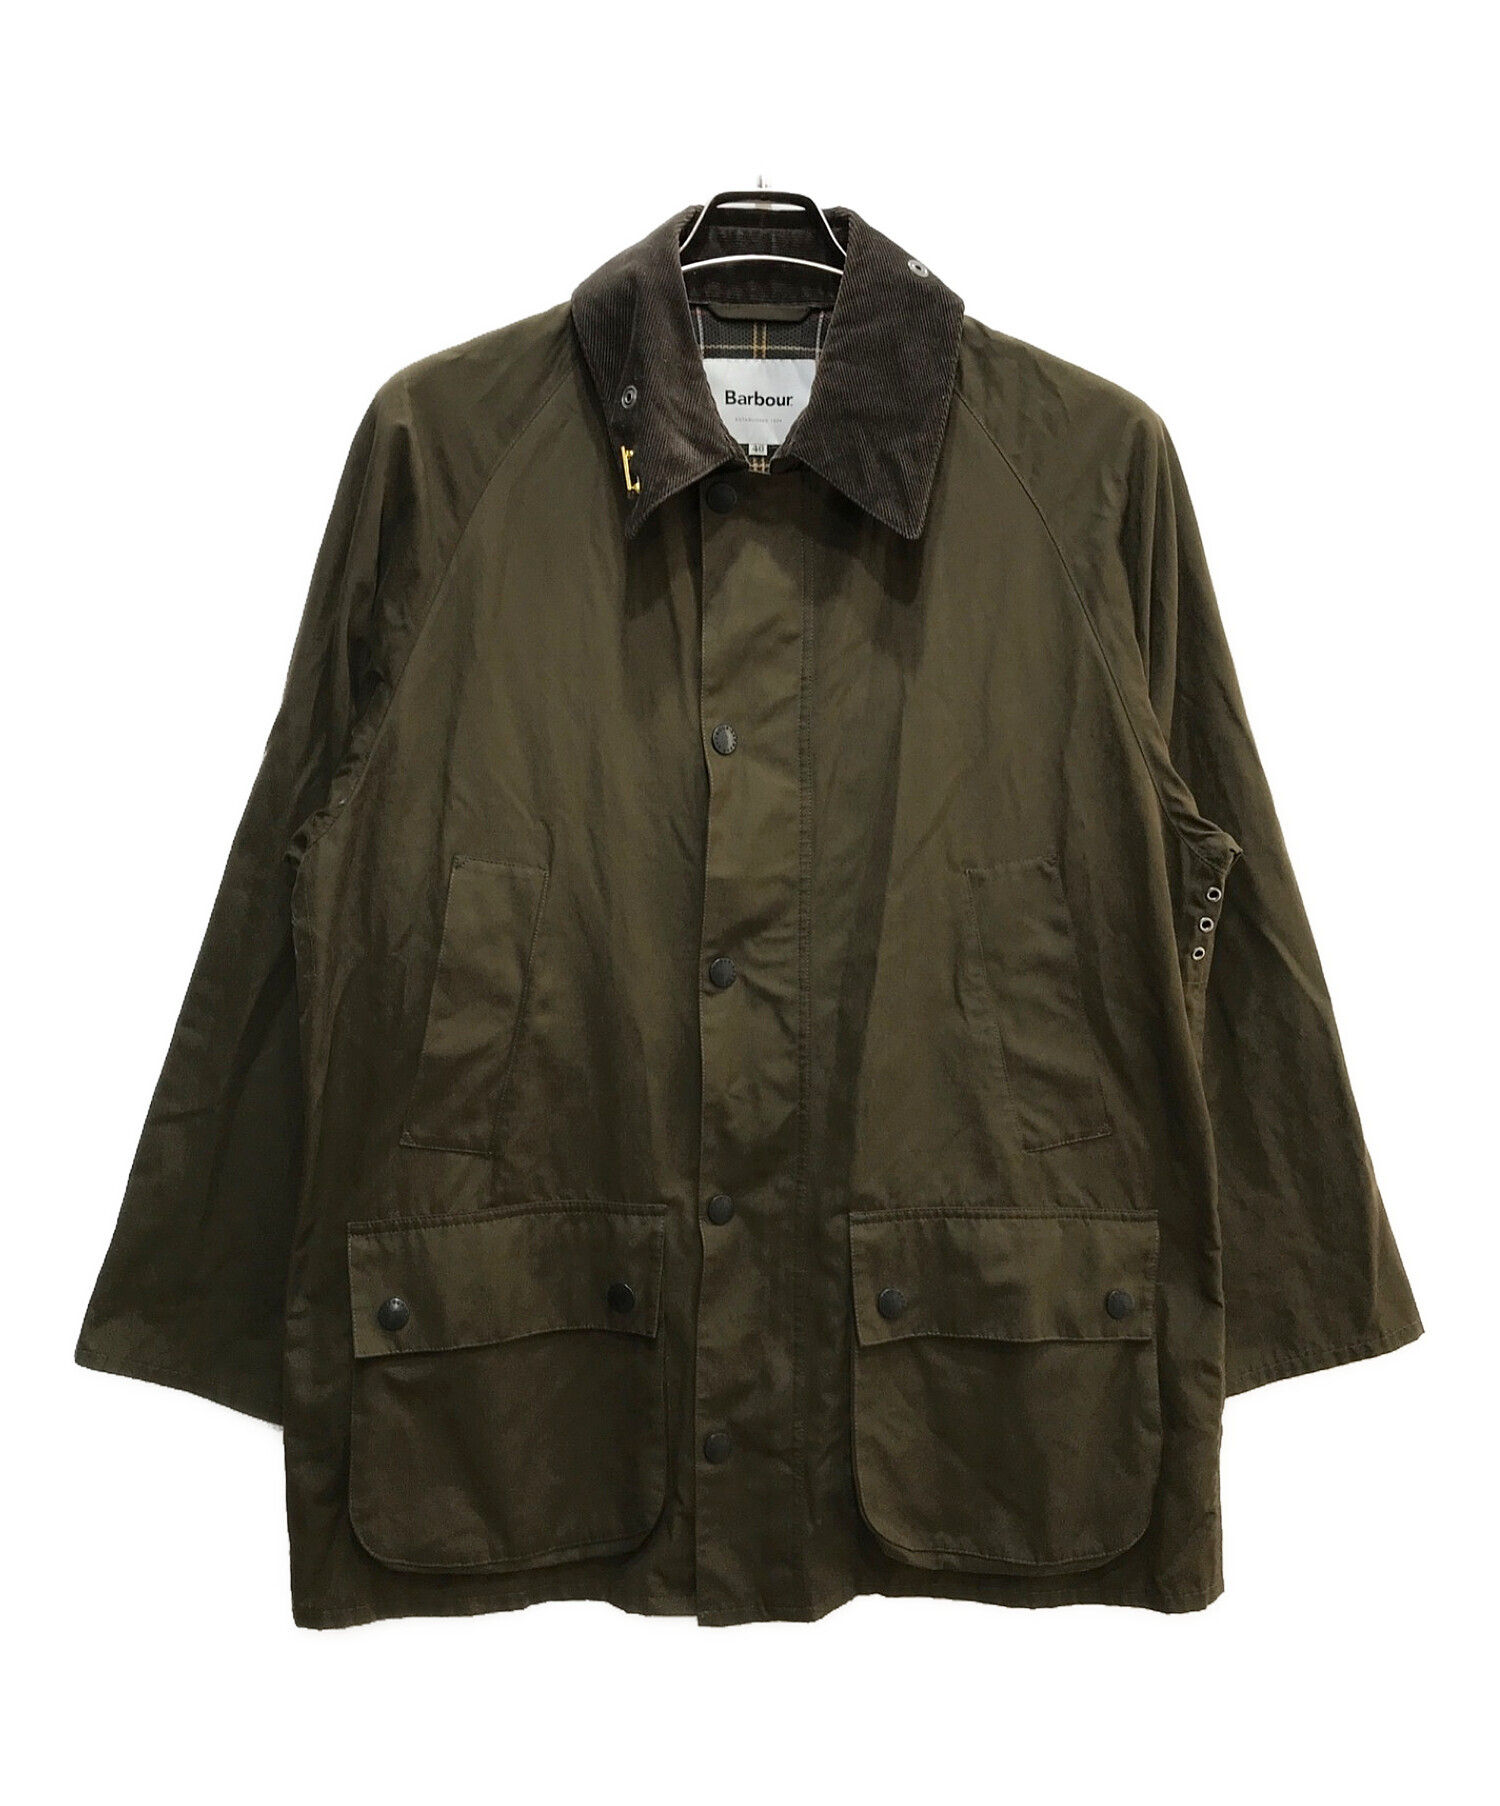 Barbour BEDALE Jacket オリーブ 40 | www.darquer.fr